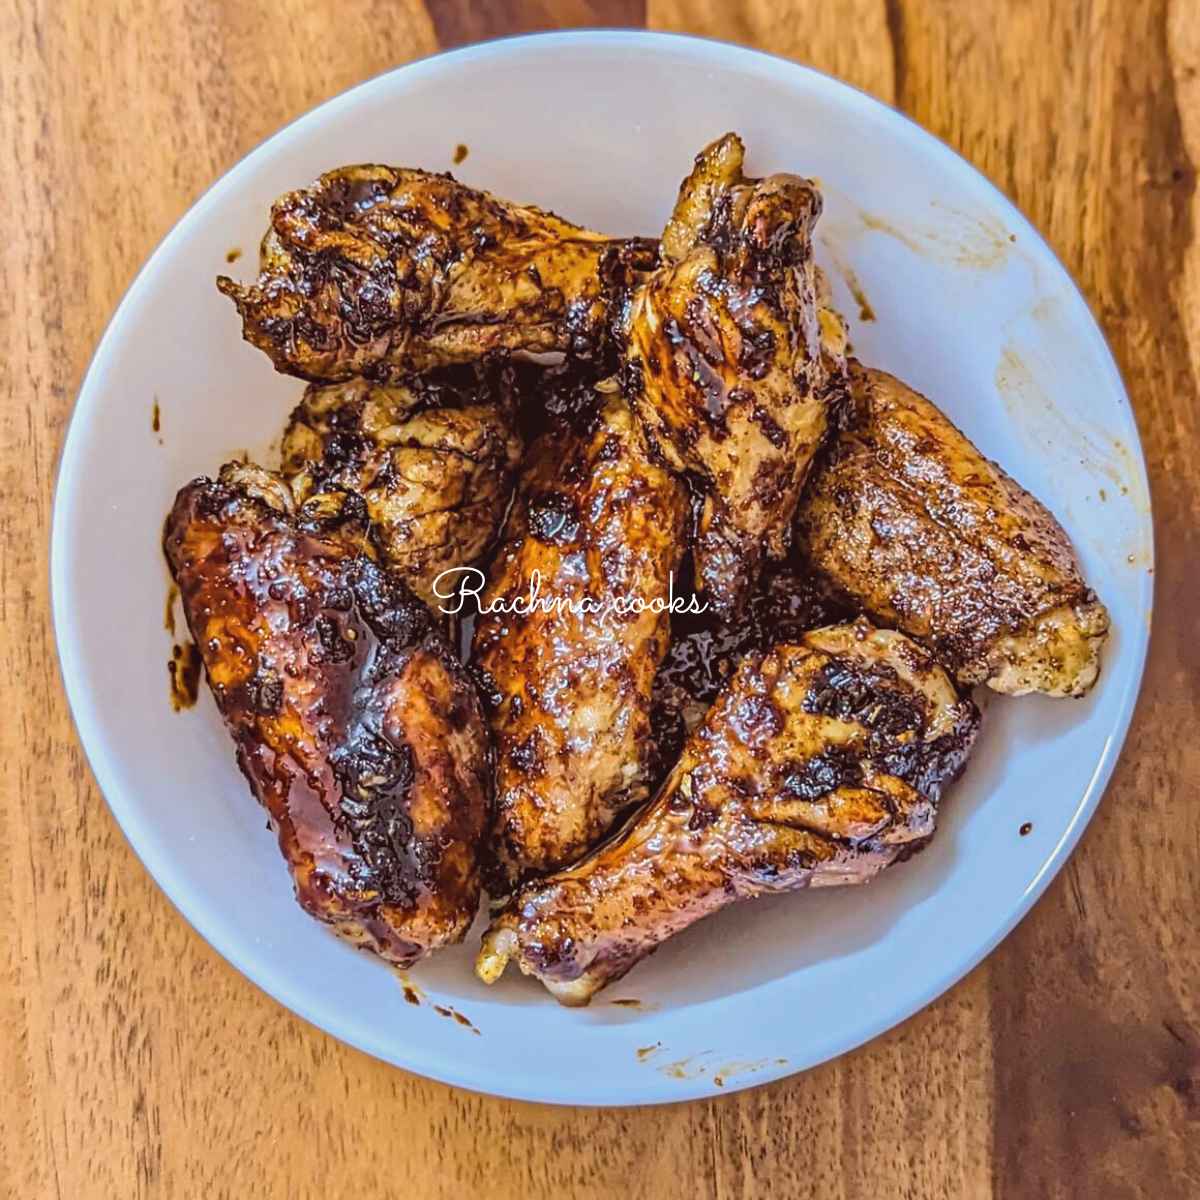 Honey garlic chicken wings after air frying served on a white plate.